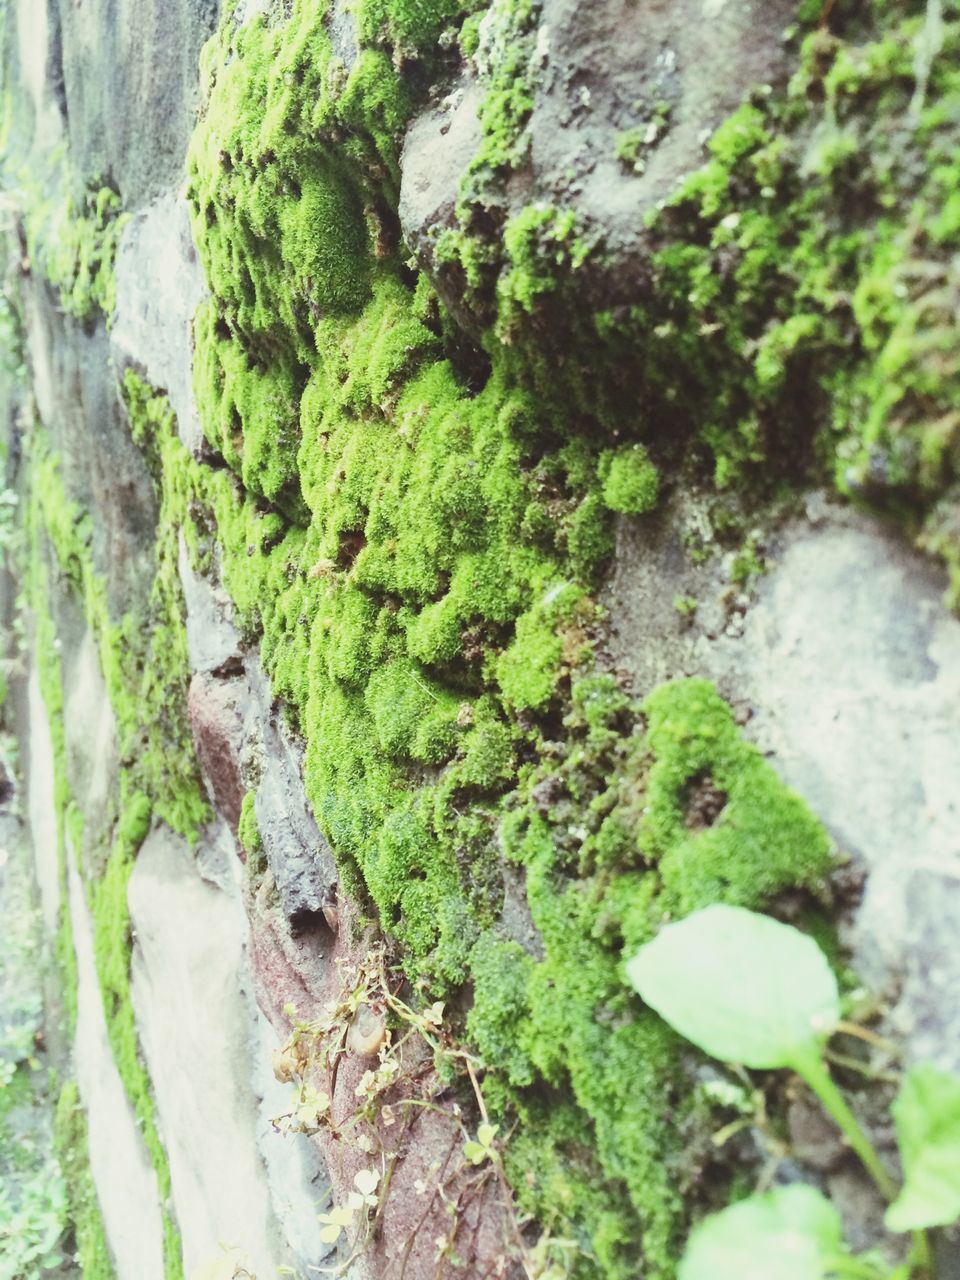 green color, growth, plant, moss, rock - object, nature, growing, close-up, beauty in nature, leaf, tranquility, high angle view, day, outdoors, forest, rock, grass, stone - object, green, no people